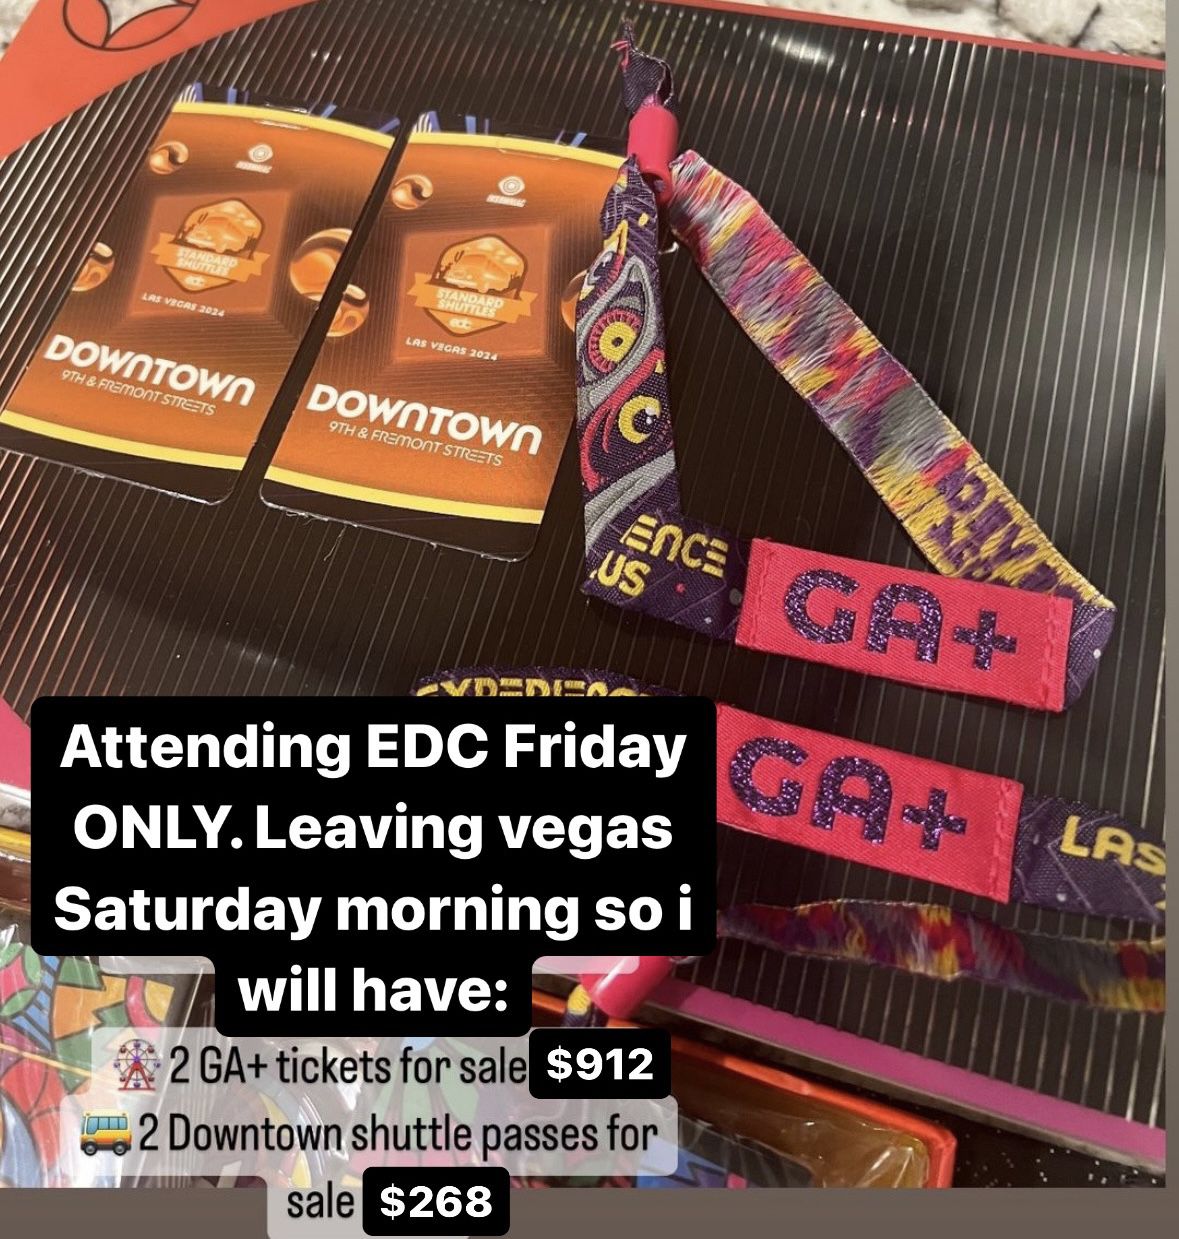 EDC GA+ For Saturday & Sunday ONLY w/ Shuttle